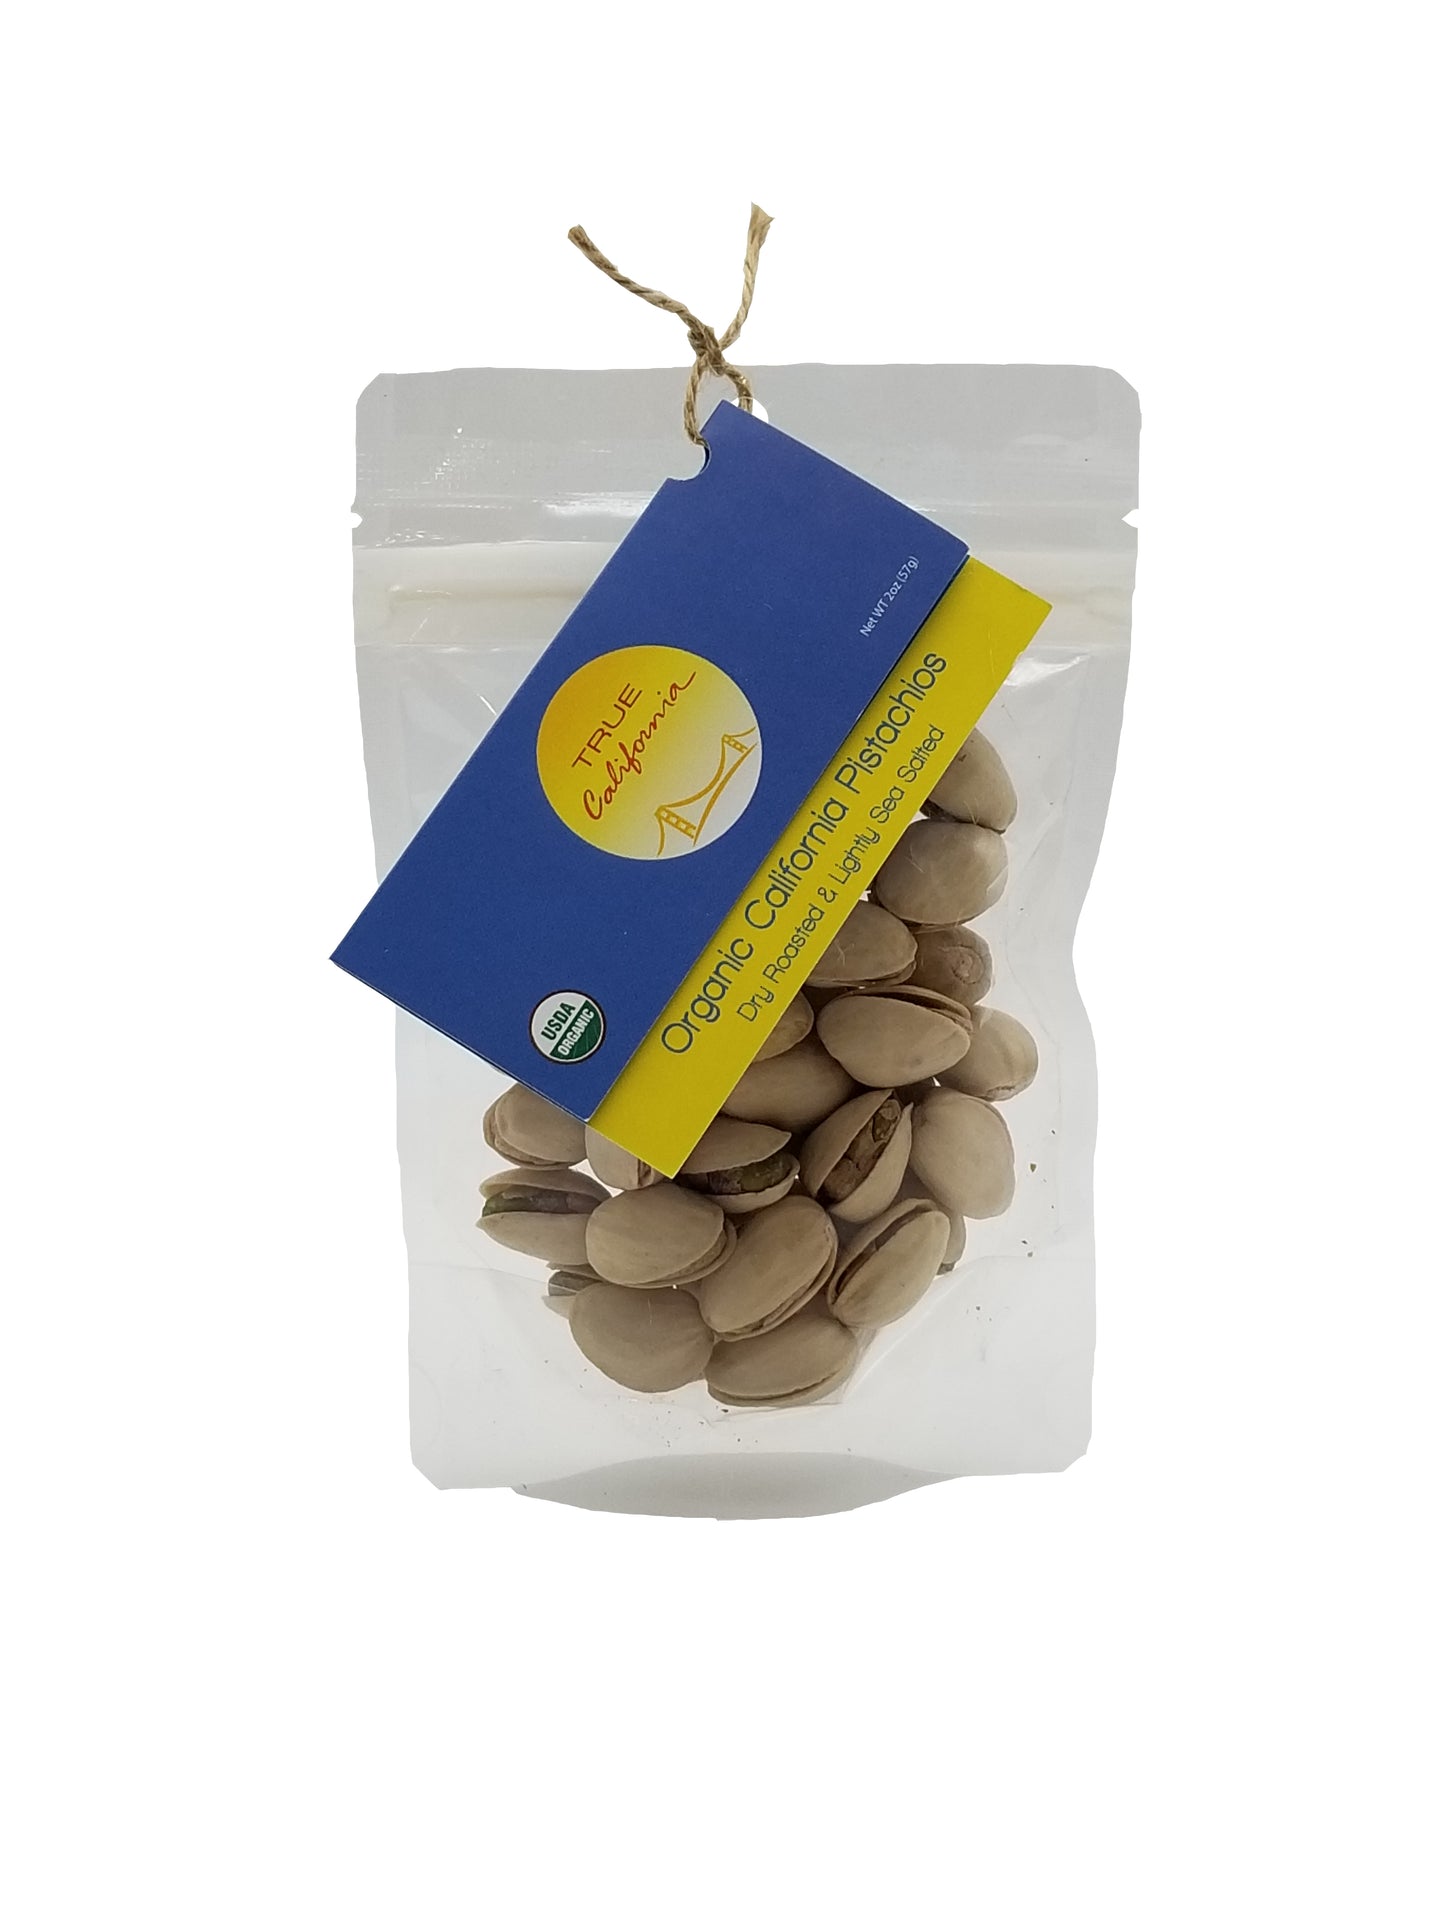 True California Organic Dry Roasted Lightly Sea Salted Pistachios in an compostable 2oz package